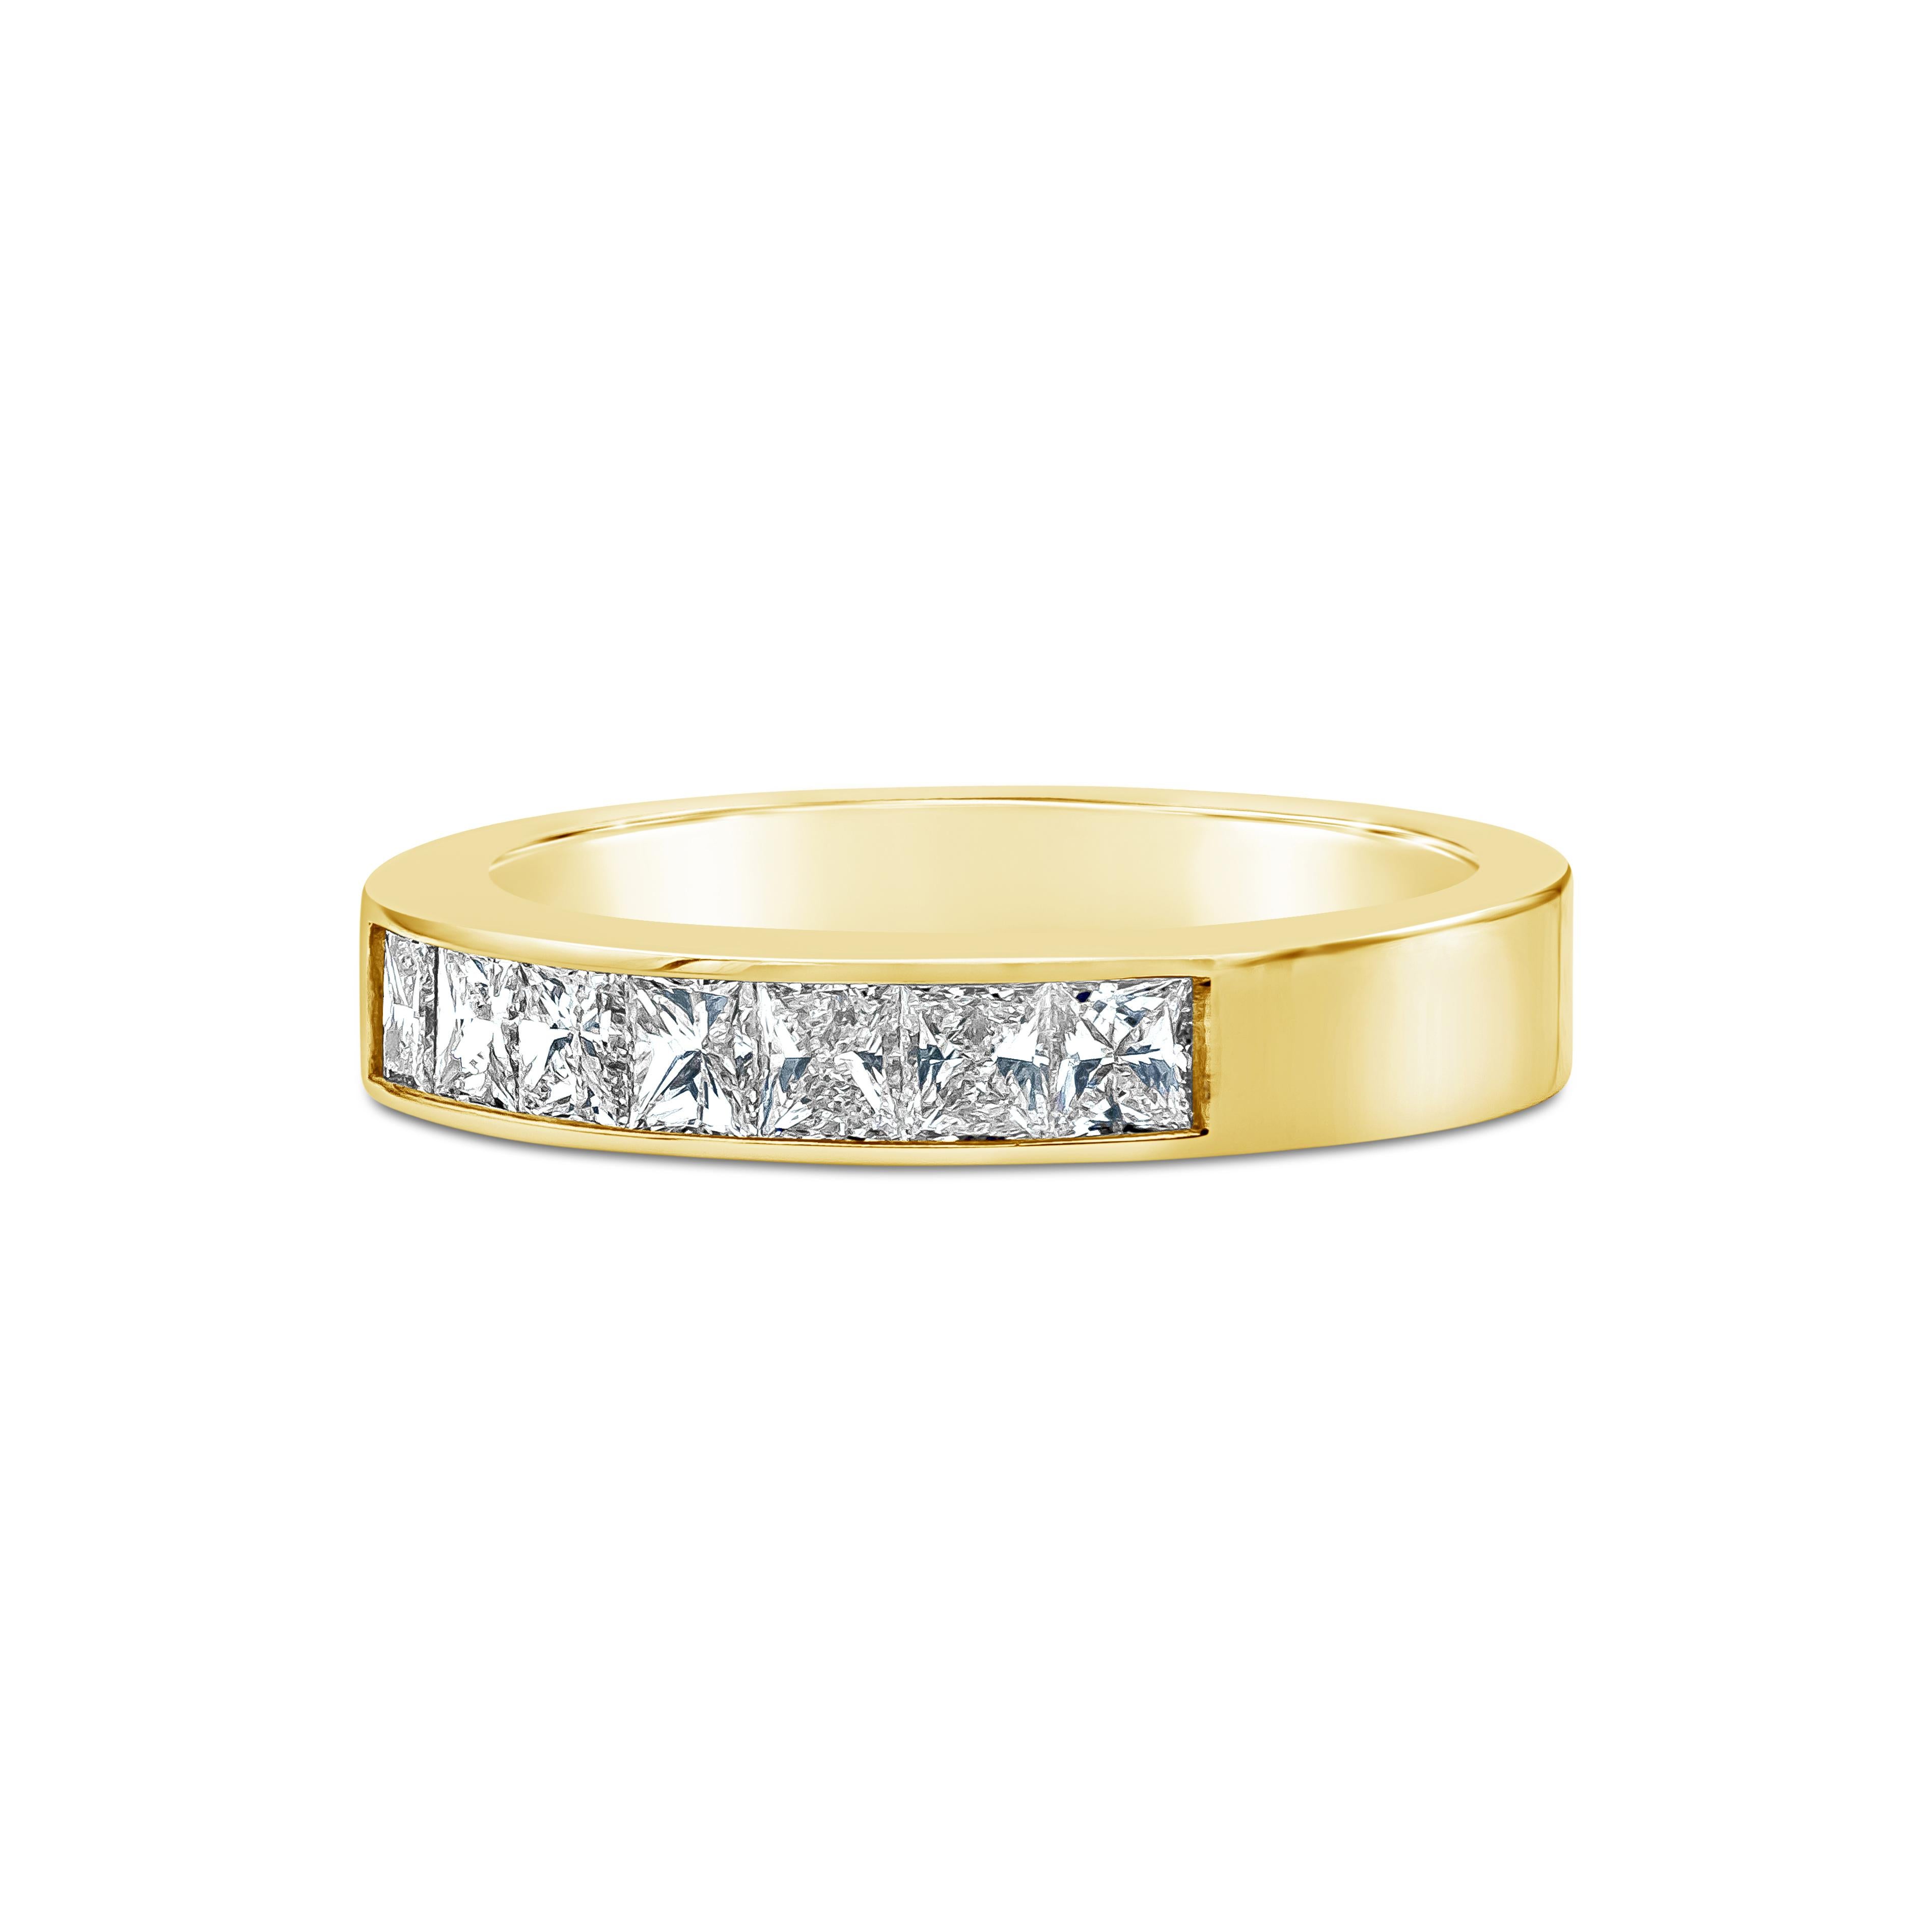 A modern wedding band showcasing 7 princess cut diamonds weighing 0.83 carats total. Set in a channel style setting. Made with 18K Yellow Gold. Size 6.5 US.

Roman Malakov is a custom house, specializing in creating anything you can imagine. If you